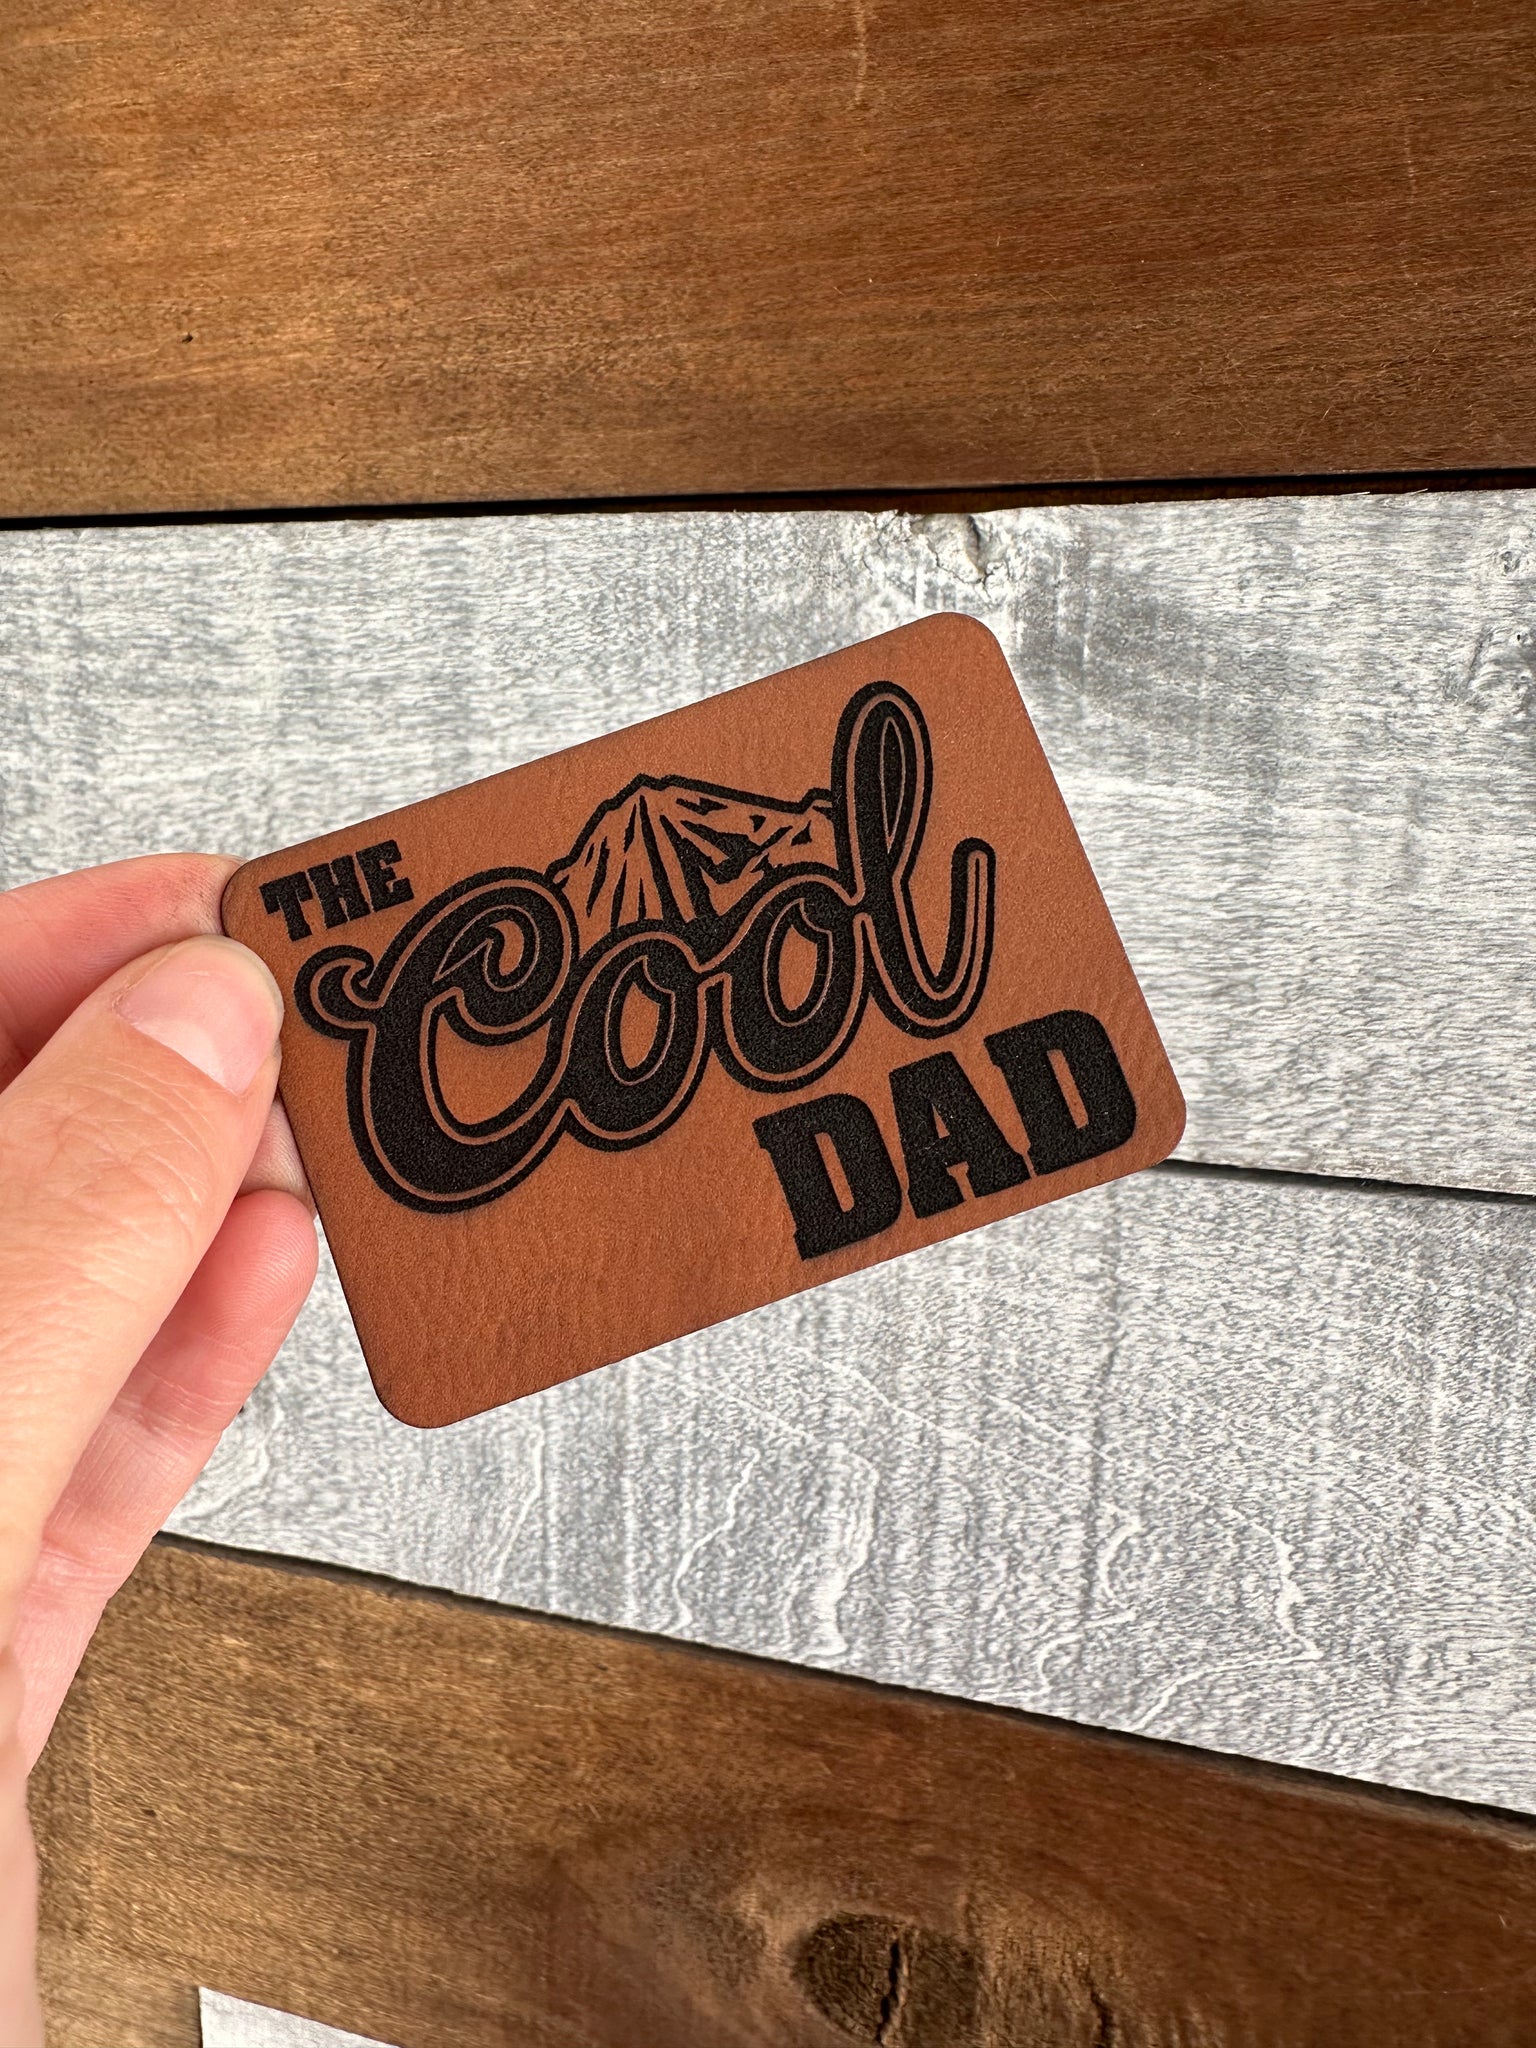 The Cool Dad Patch